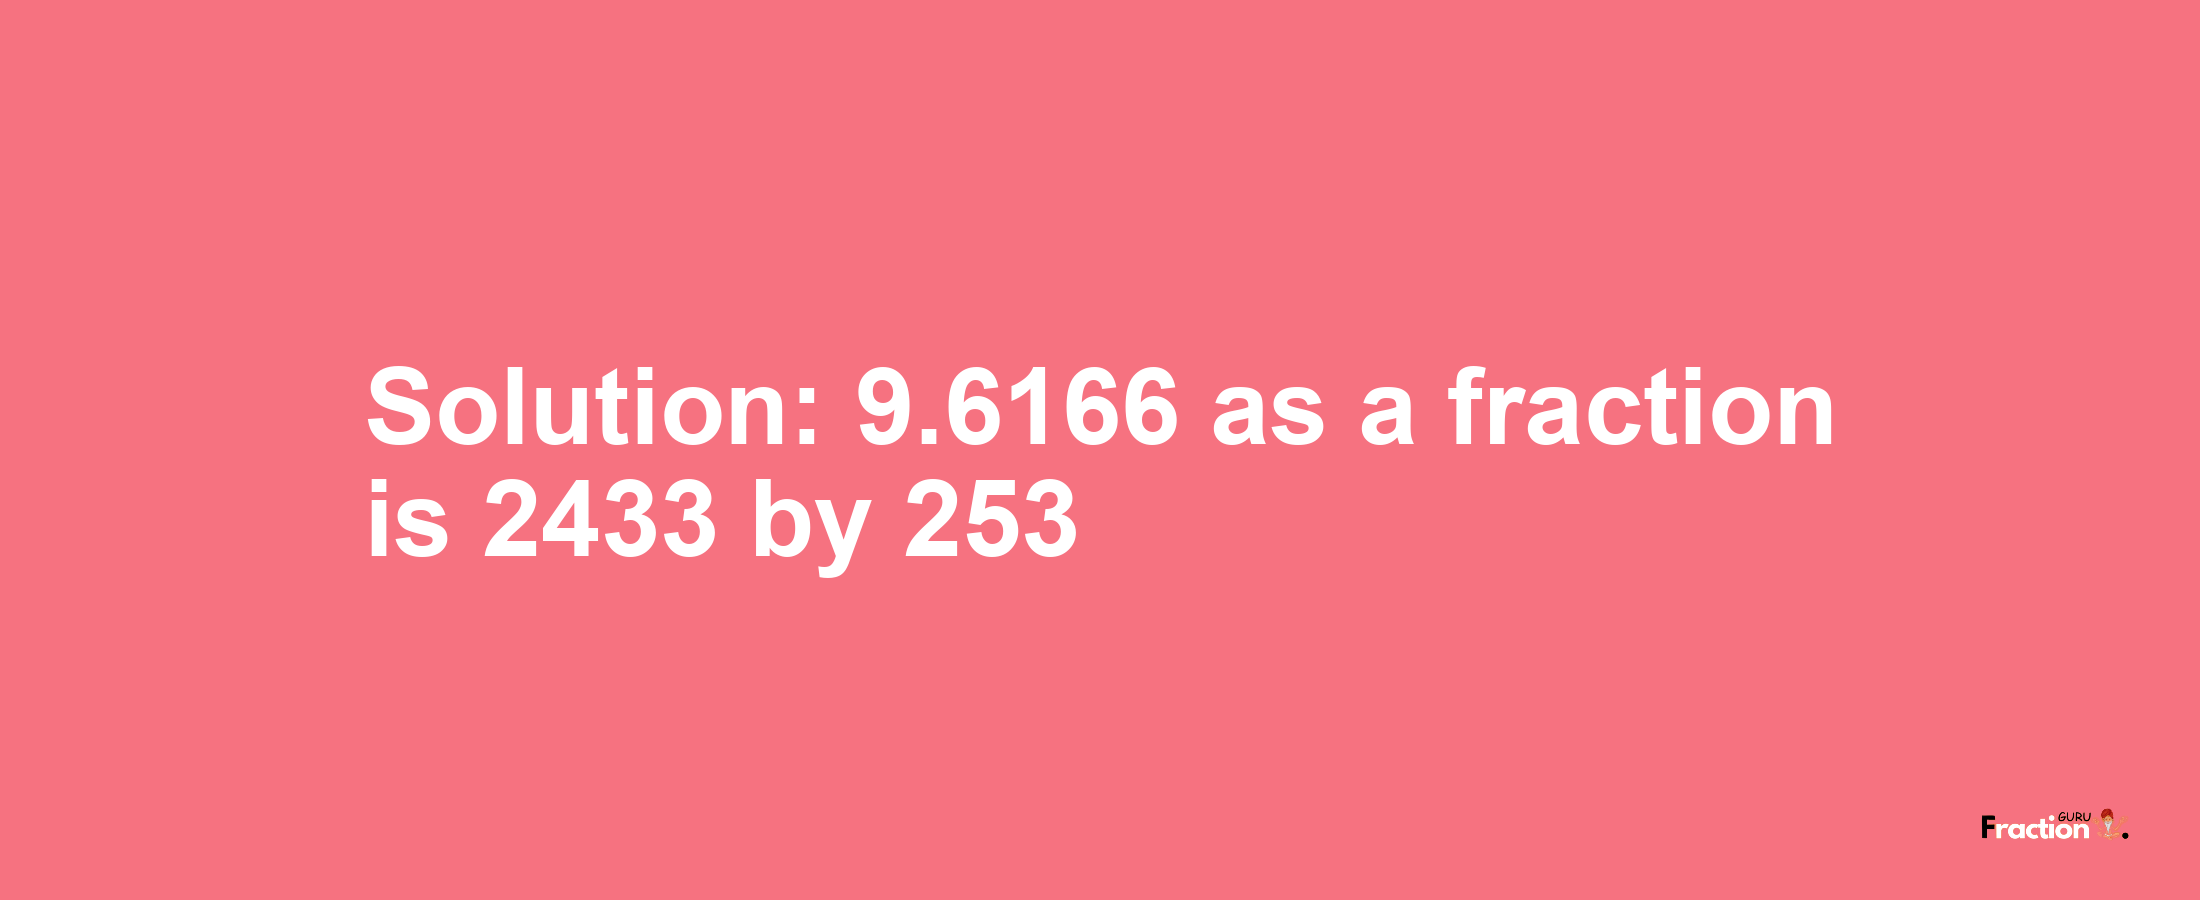 Solution:9.6166 as a fraction is 2433/253